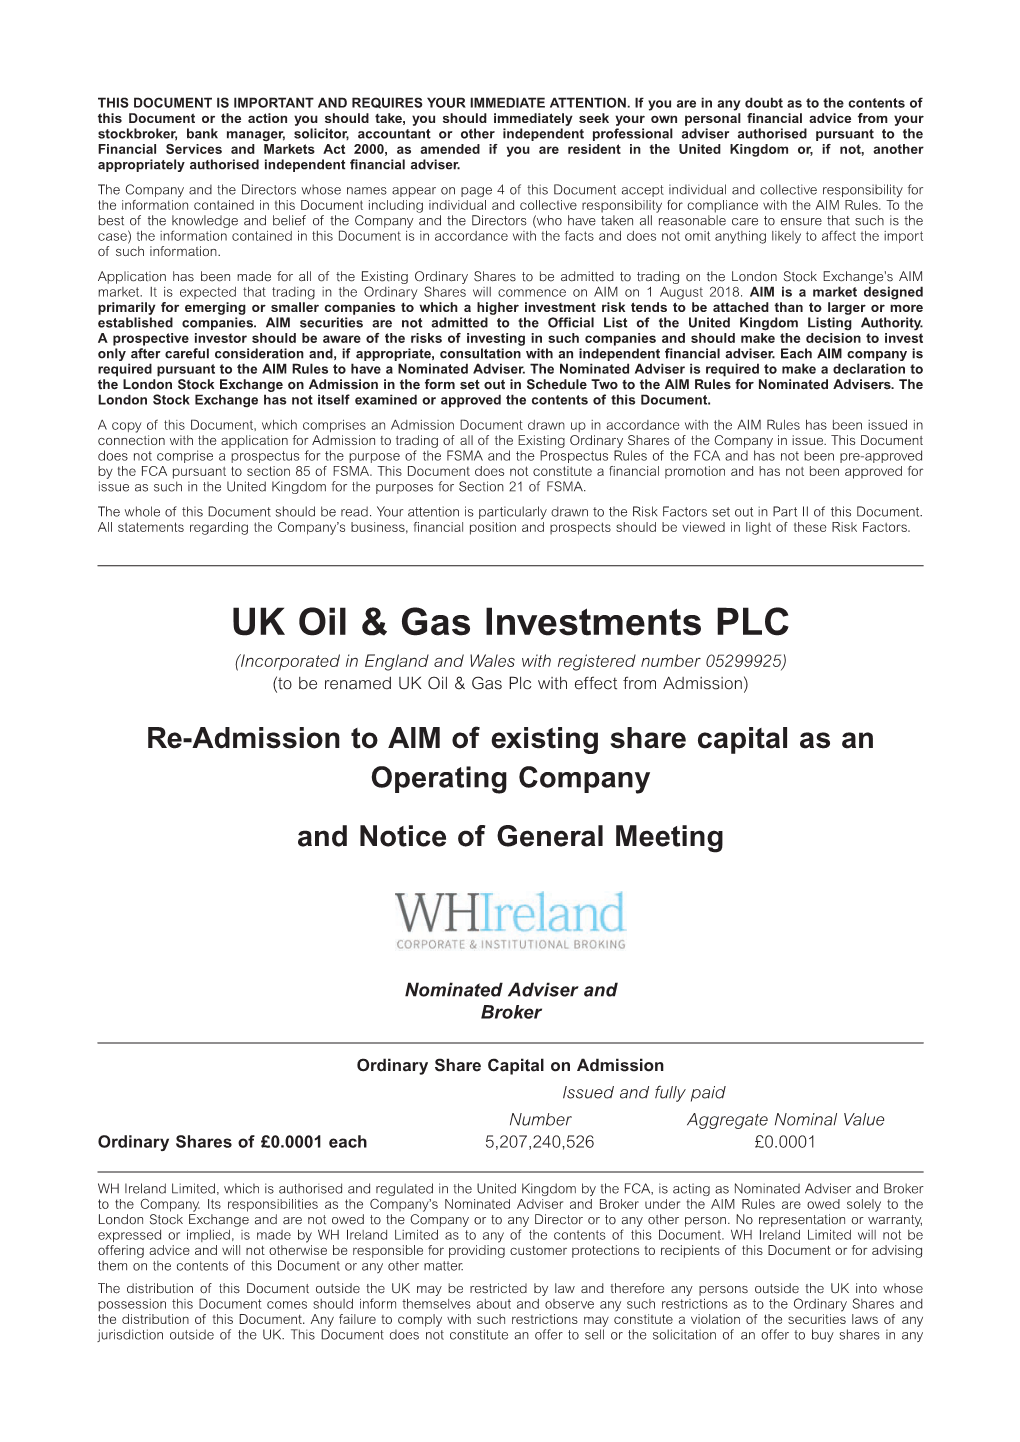 UK Oil & Gas Investments